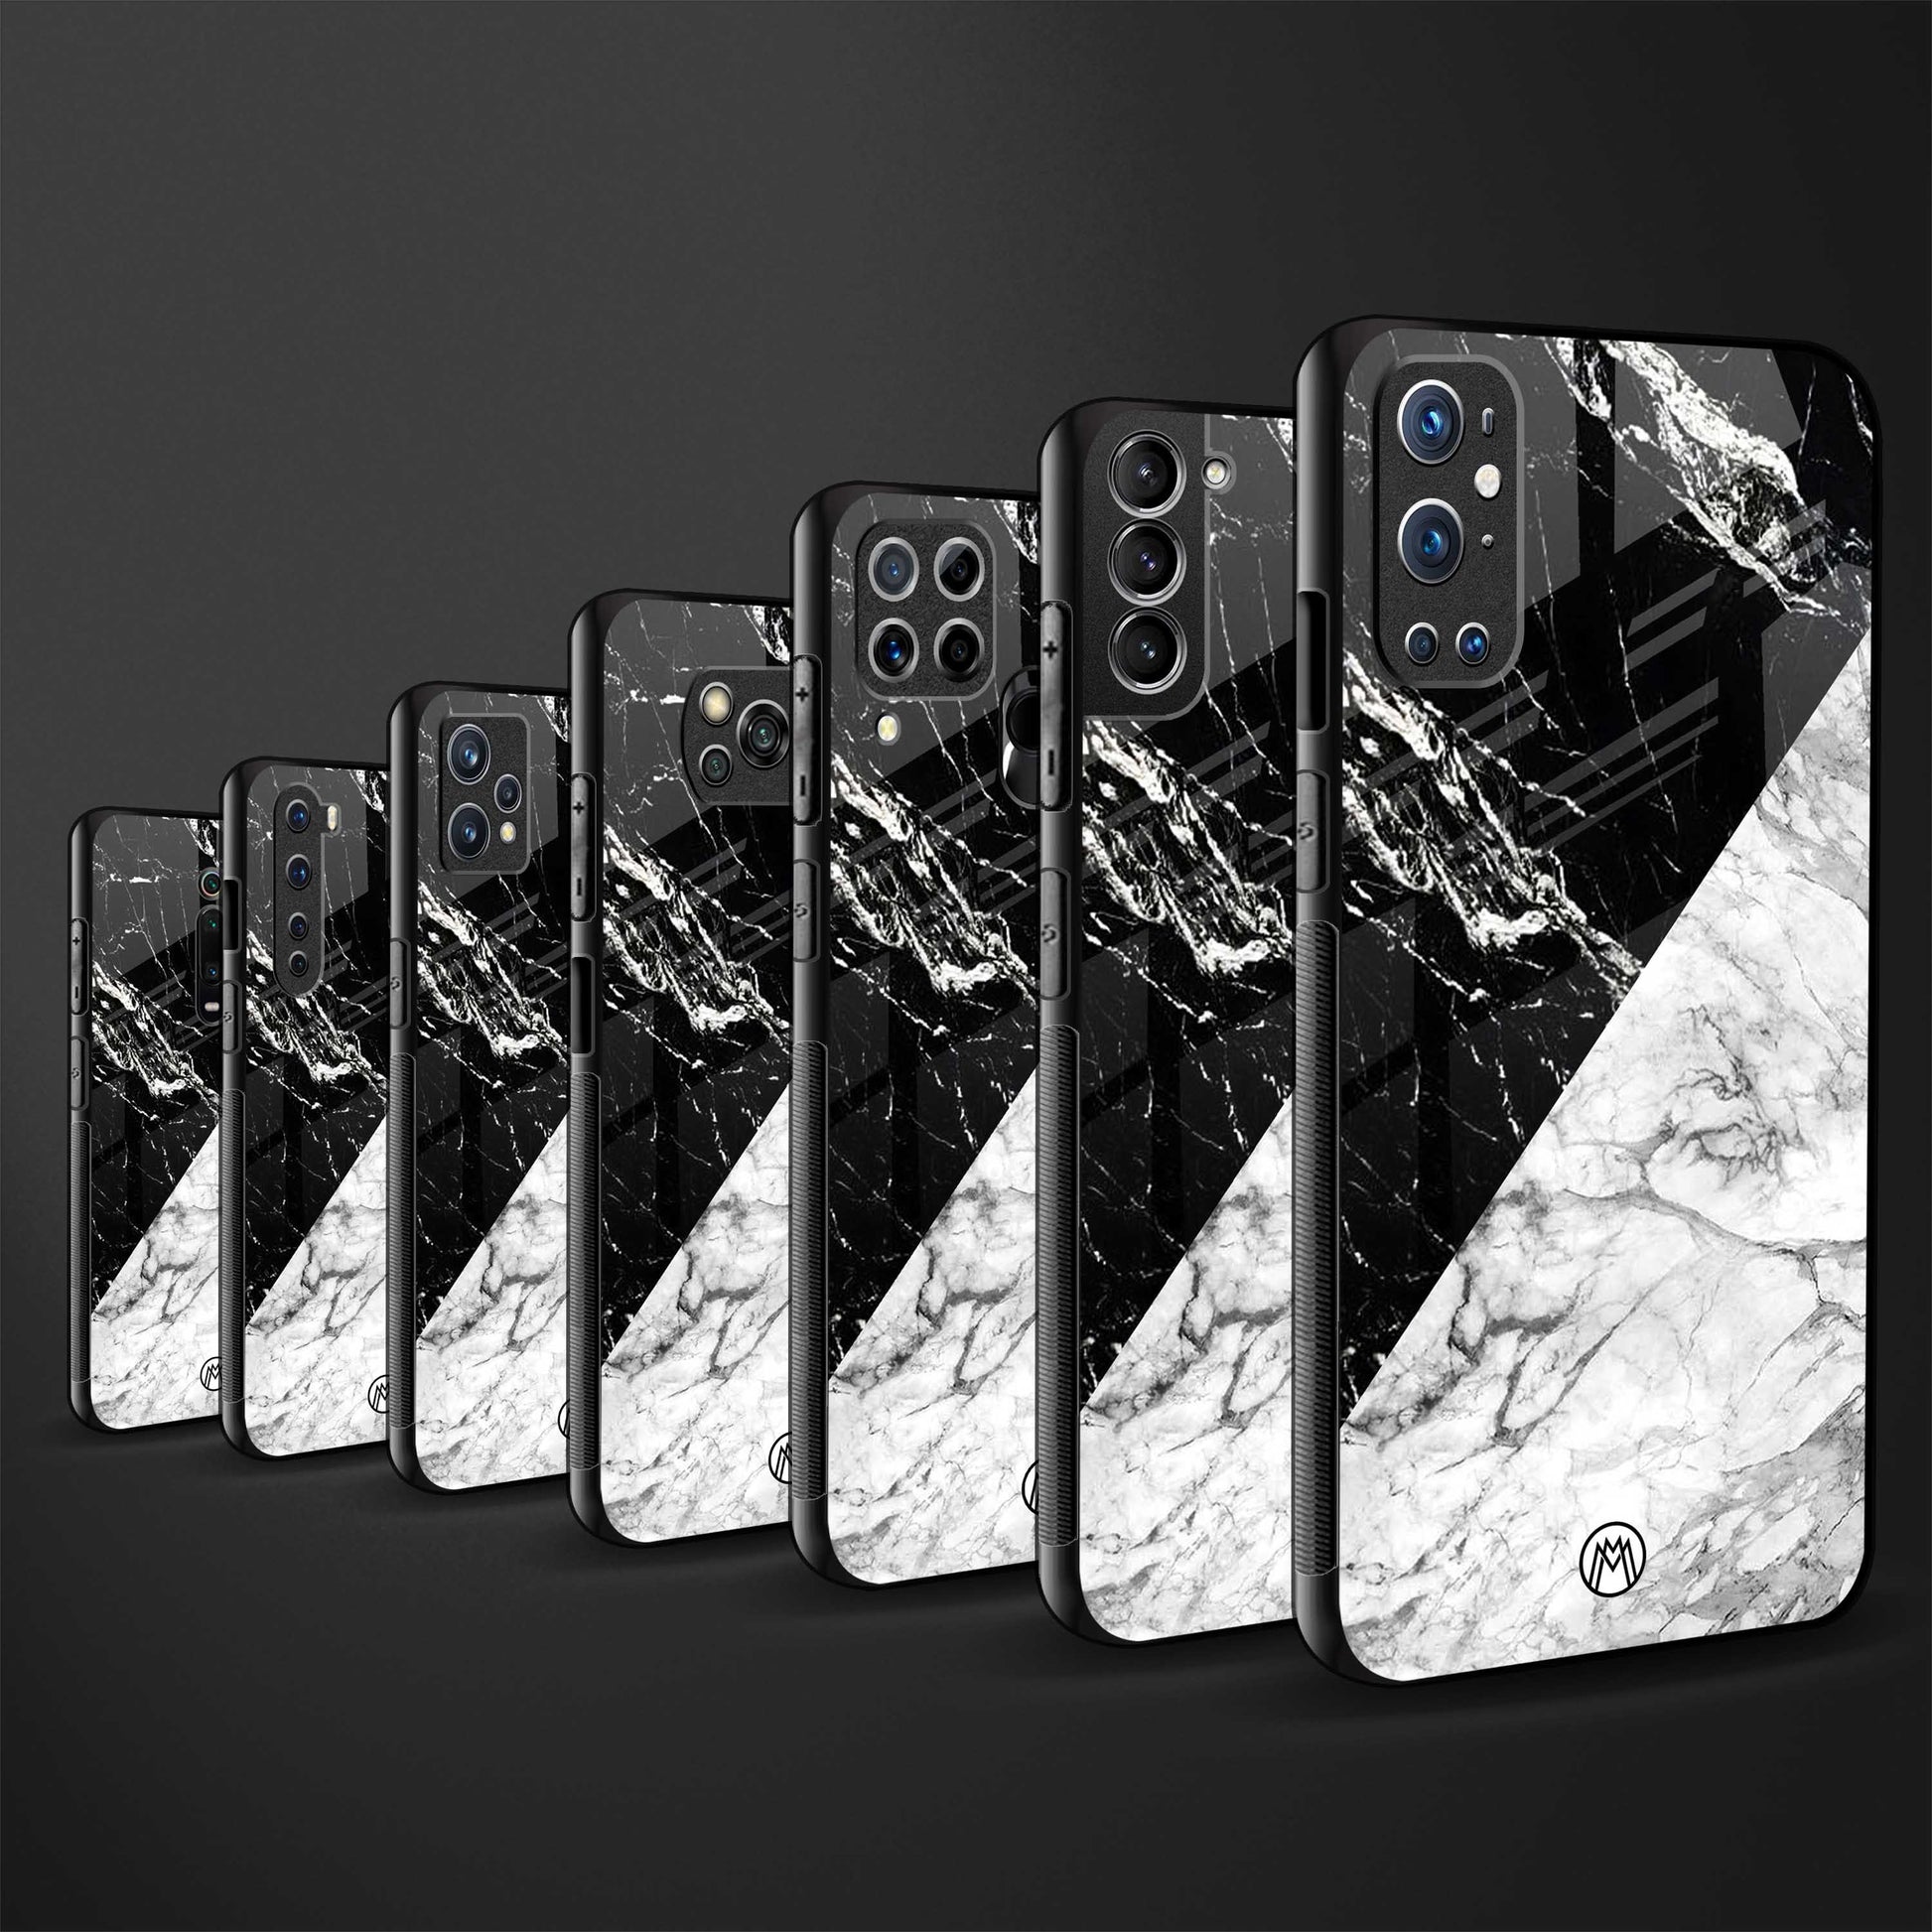 fatal contradiction phone cover for oneplus 9 pro